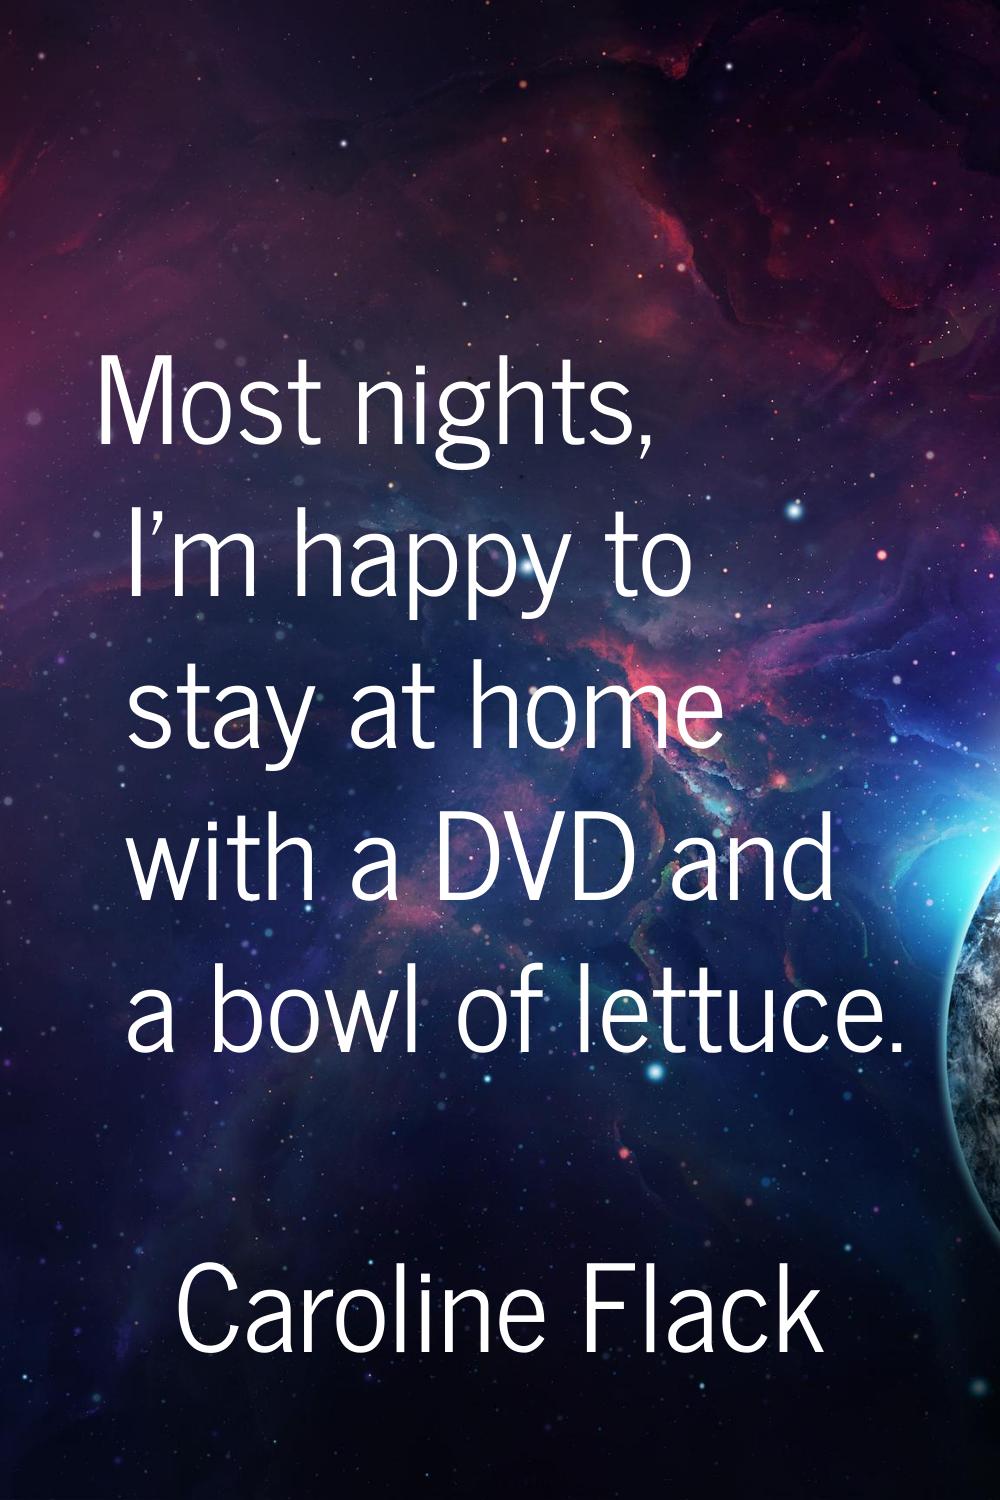 Most nights, I'm happy to stay at home with a DVD and a bowl of lettuce.